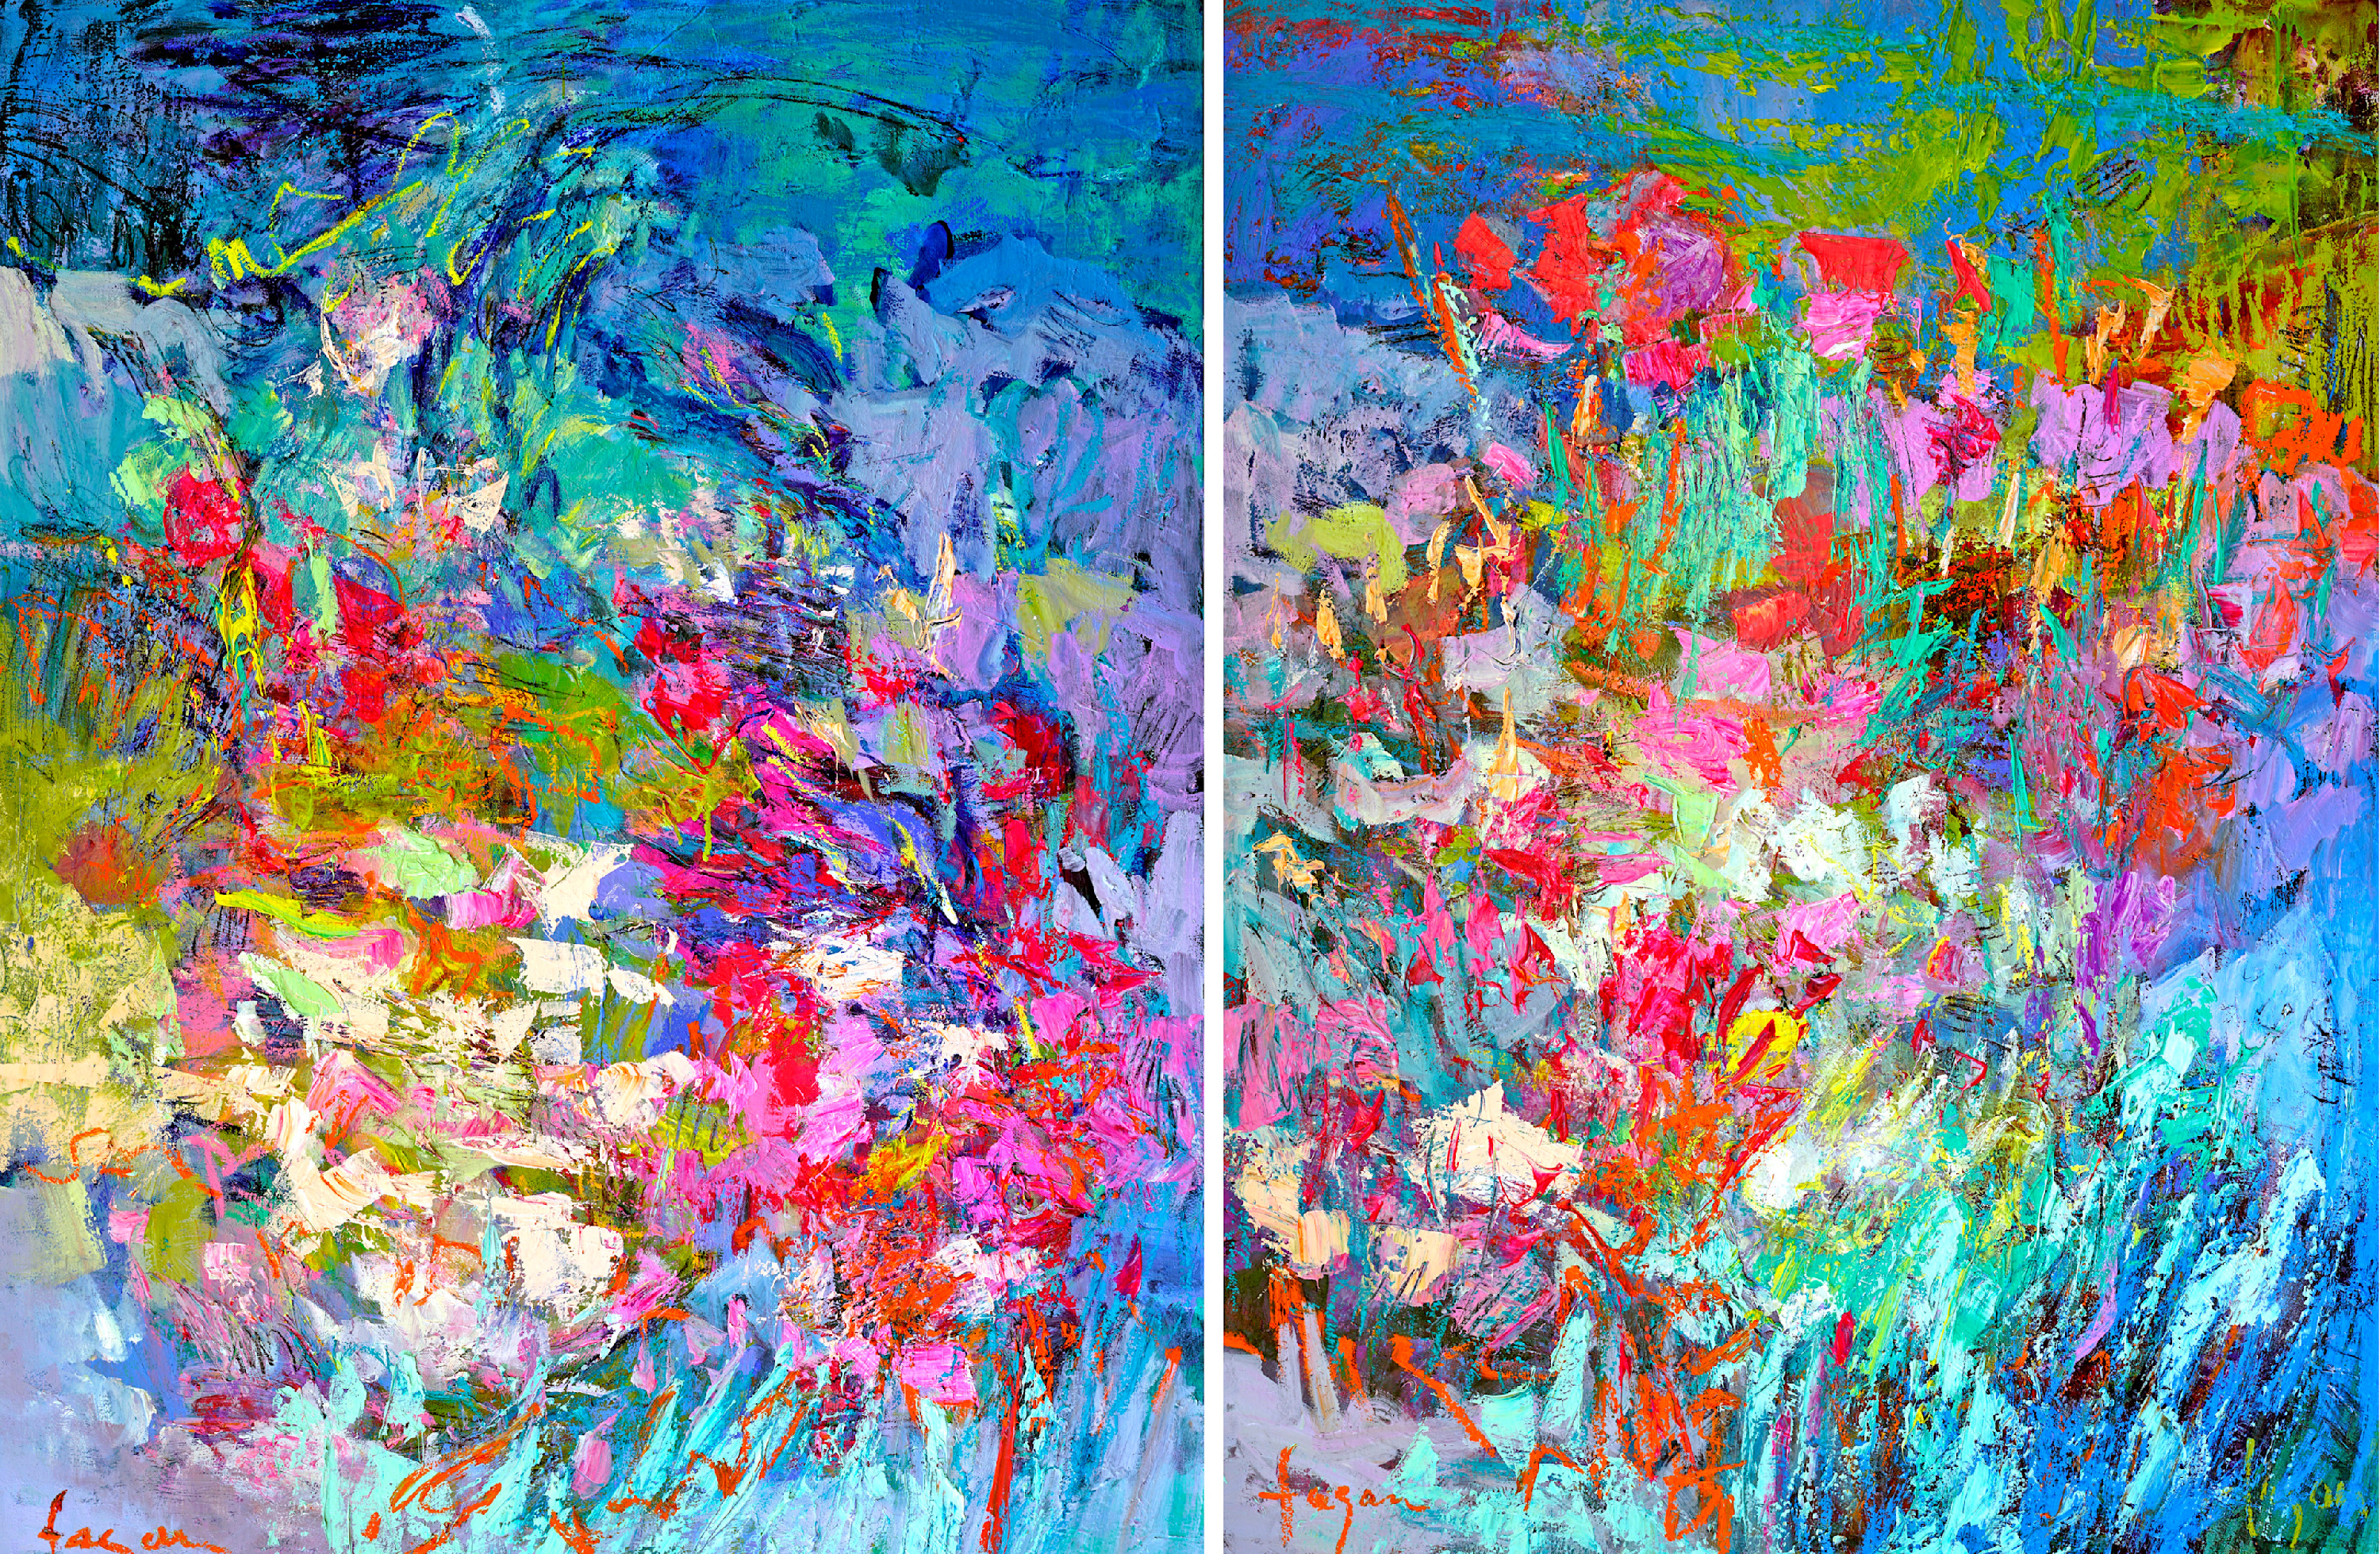 Forevermore ii diptych fzbaac